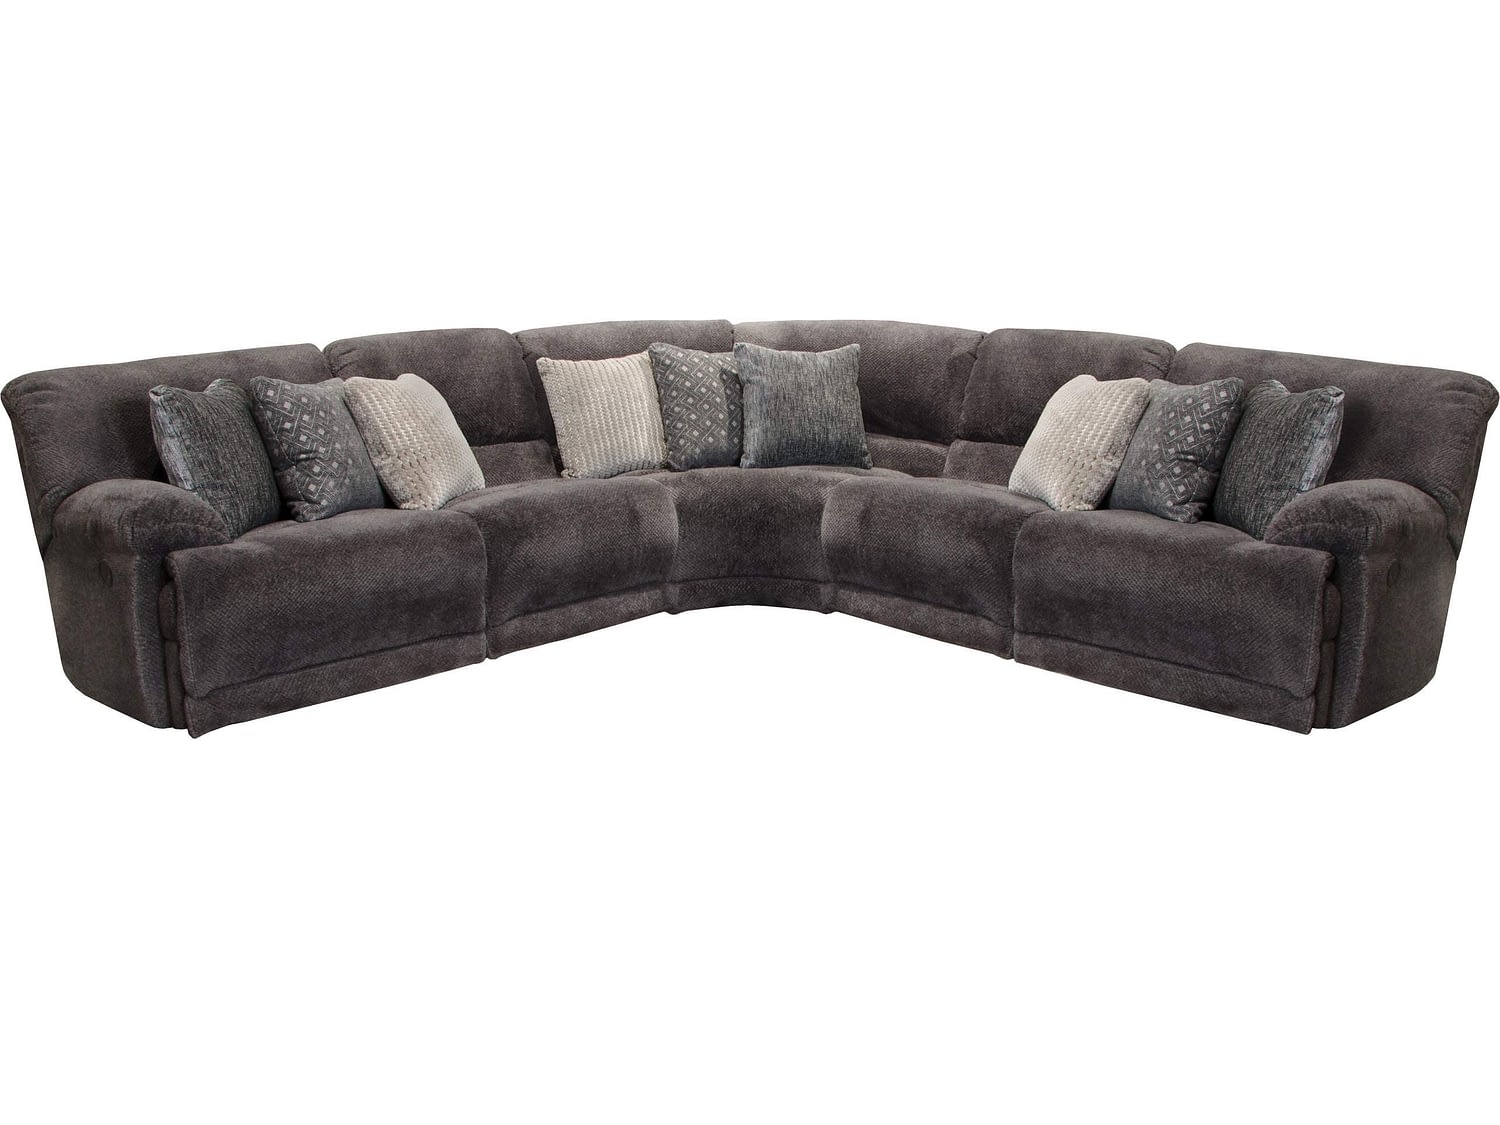 NORAH Reclining Sectional - Zoom